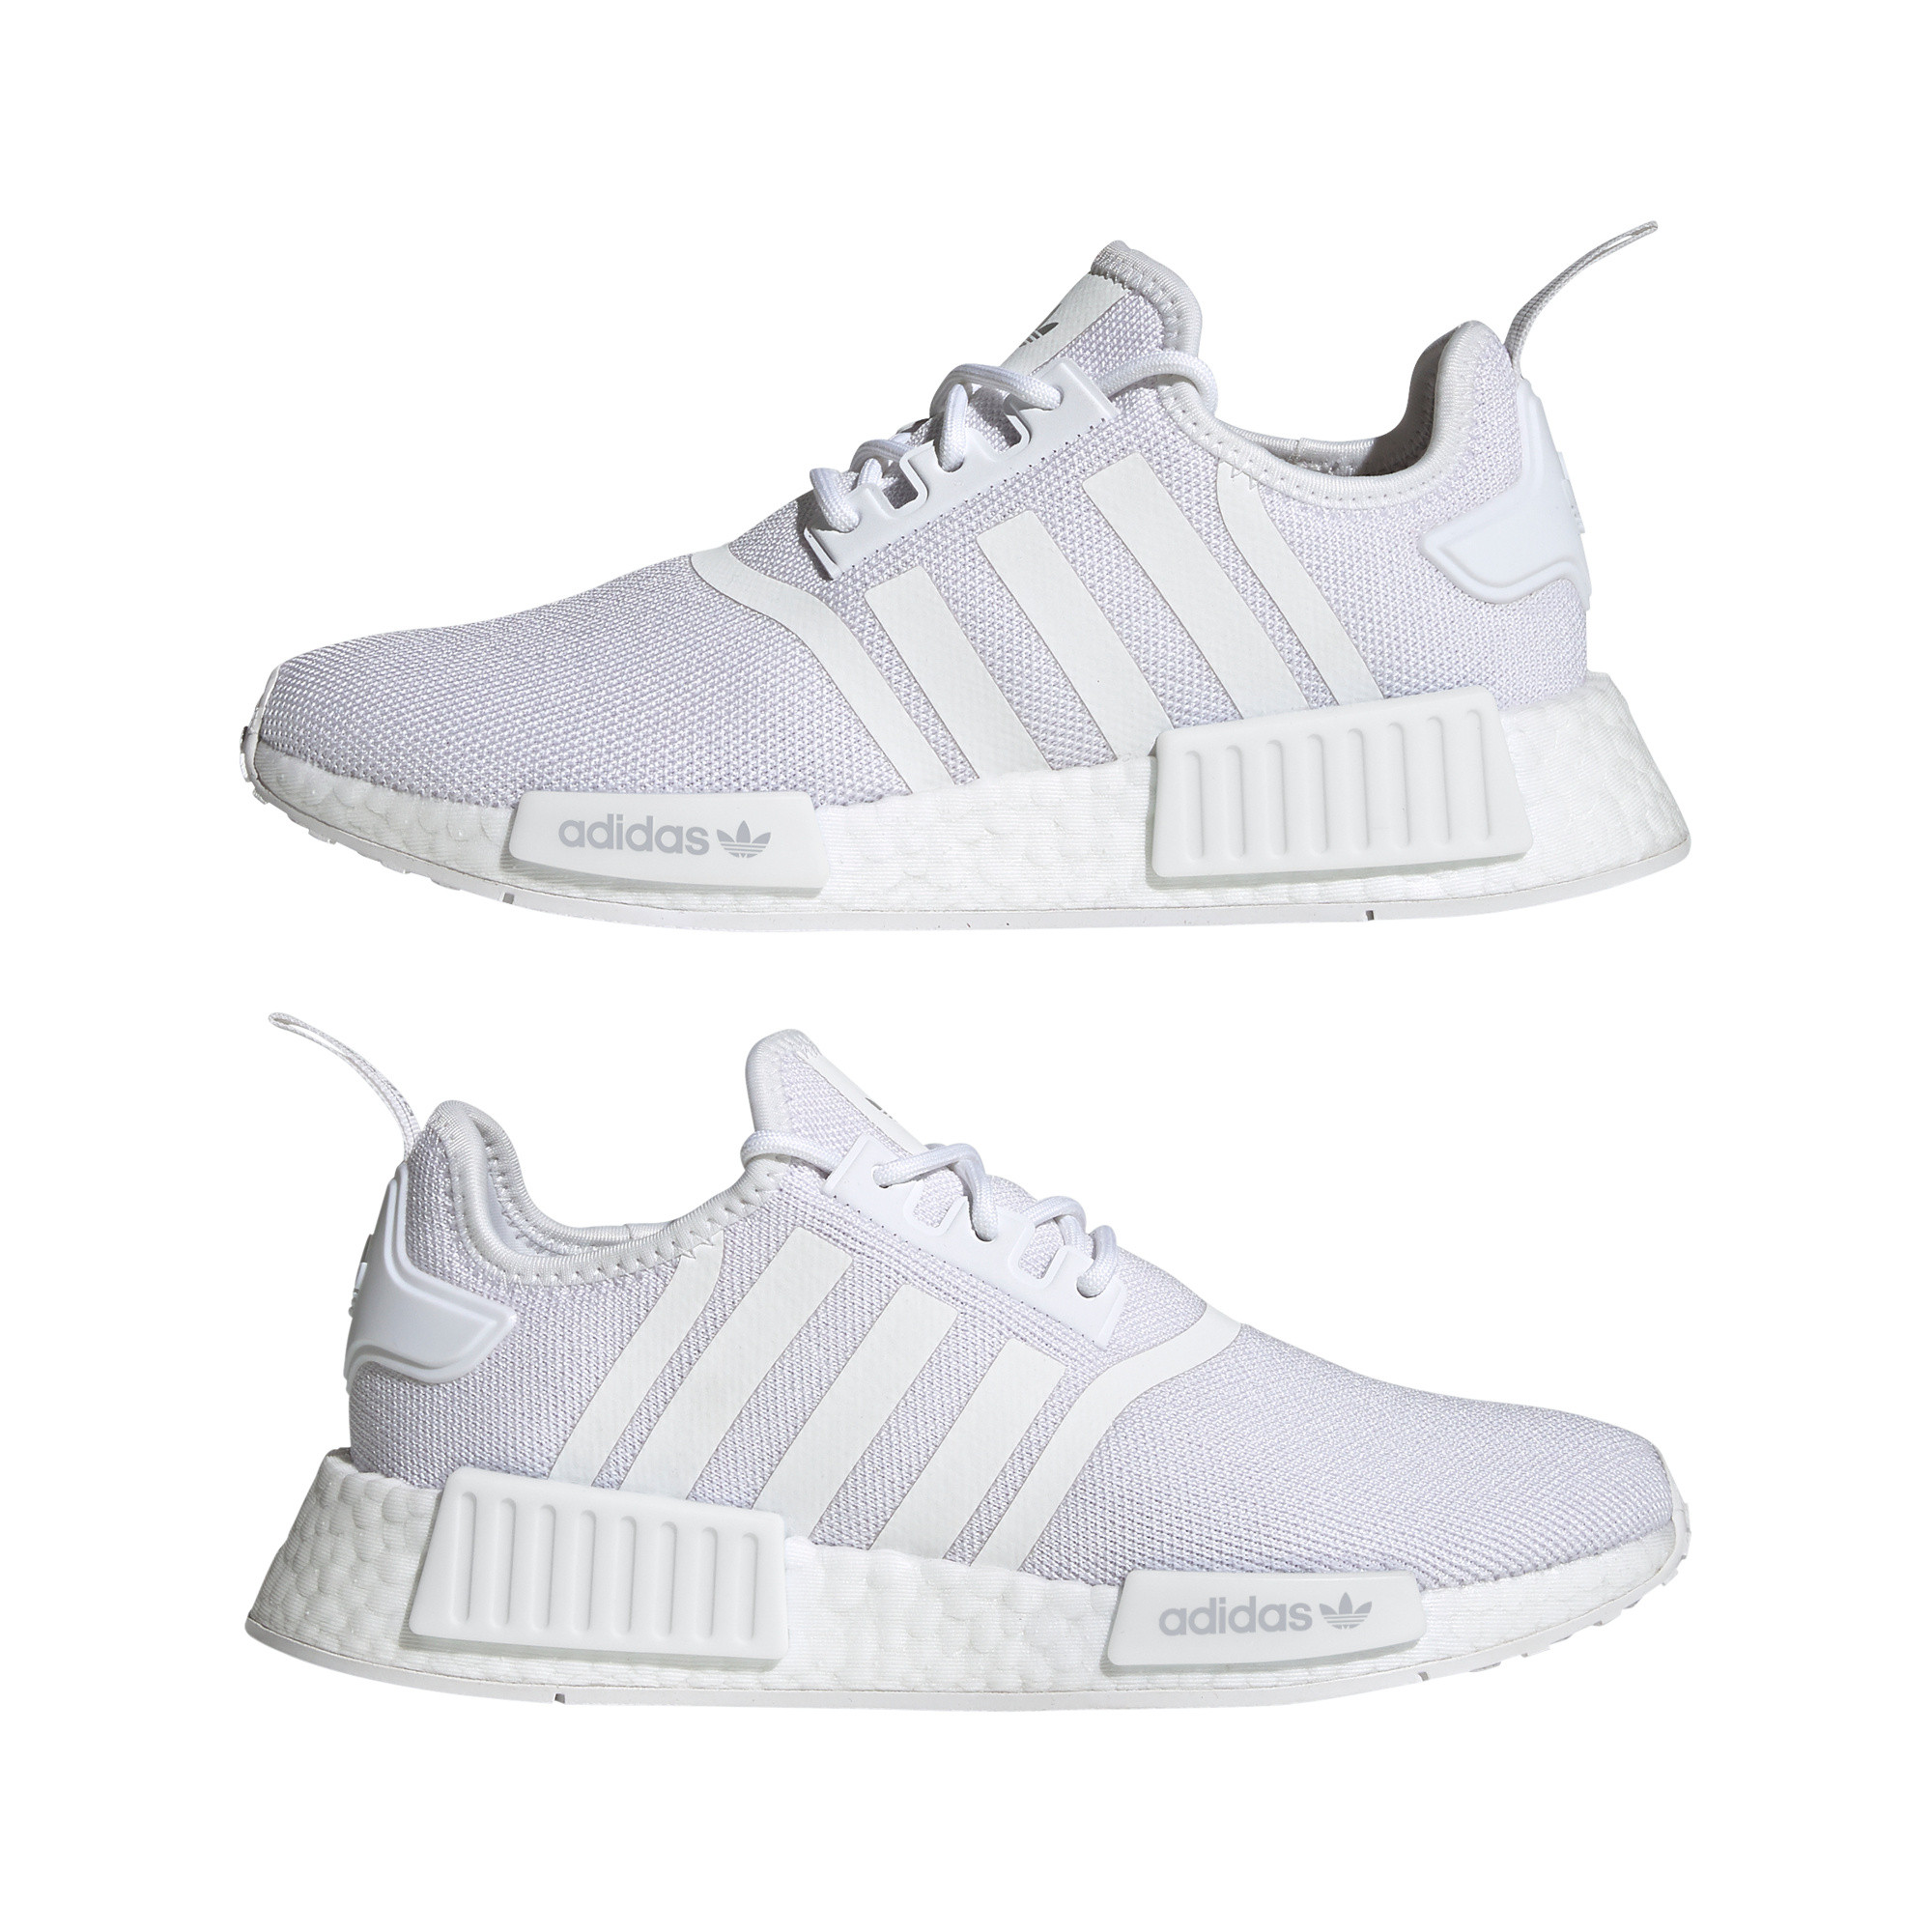 NMD_R1 Primeblue Shoes, White / Grey, large image number 4